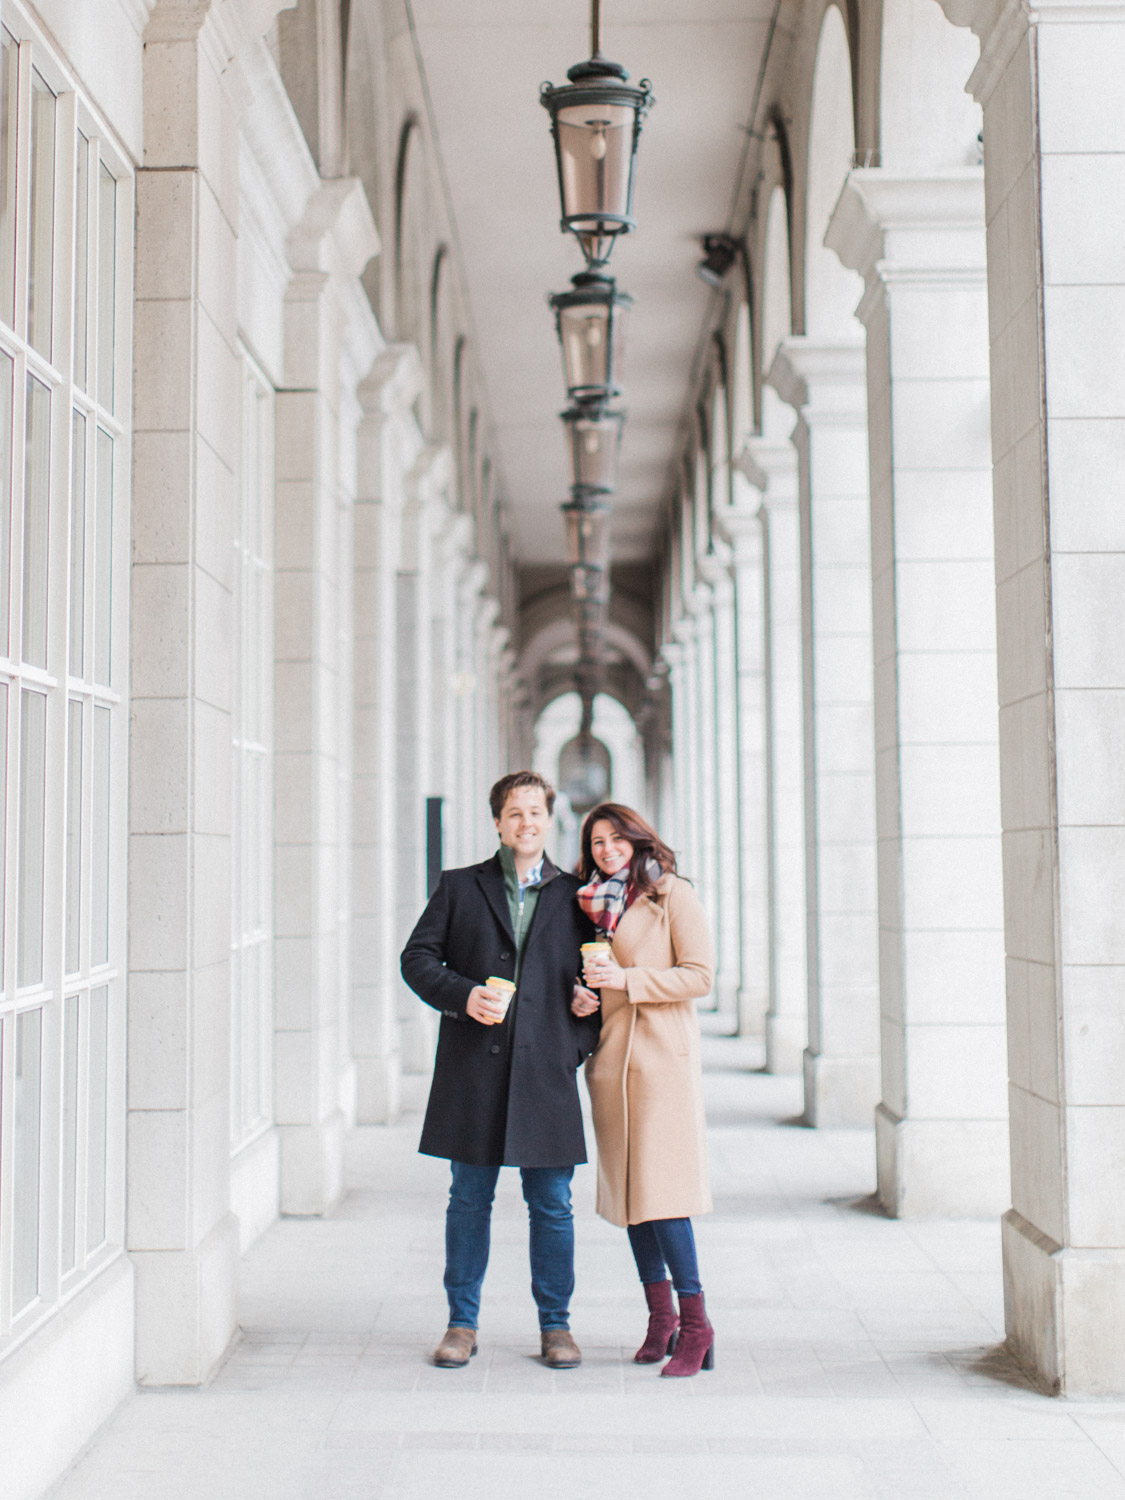 Cute engagement photographs from the st laurence market and the beaches in Toronto, by toronto wedding photographer corynn fowler photography